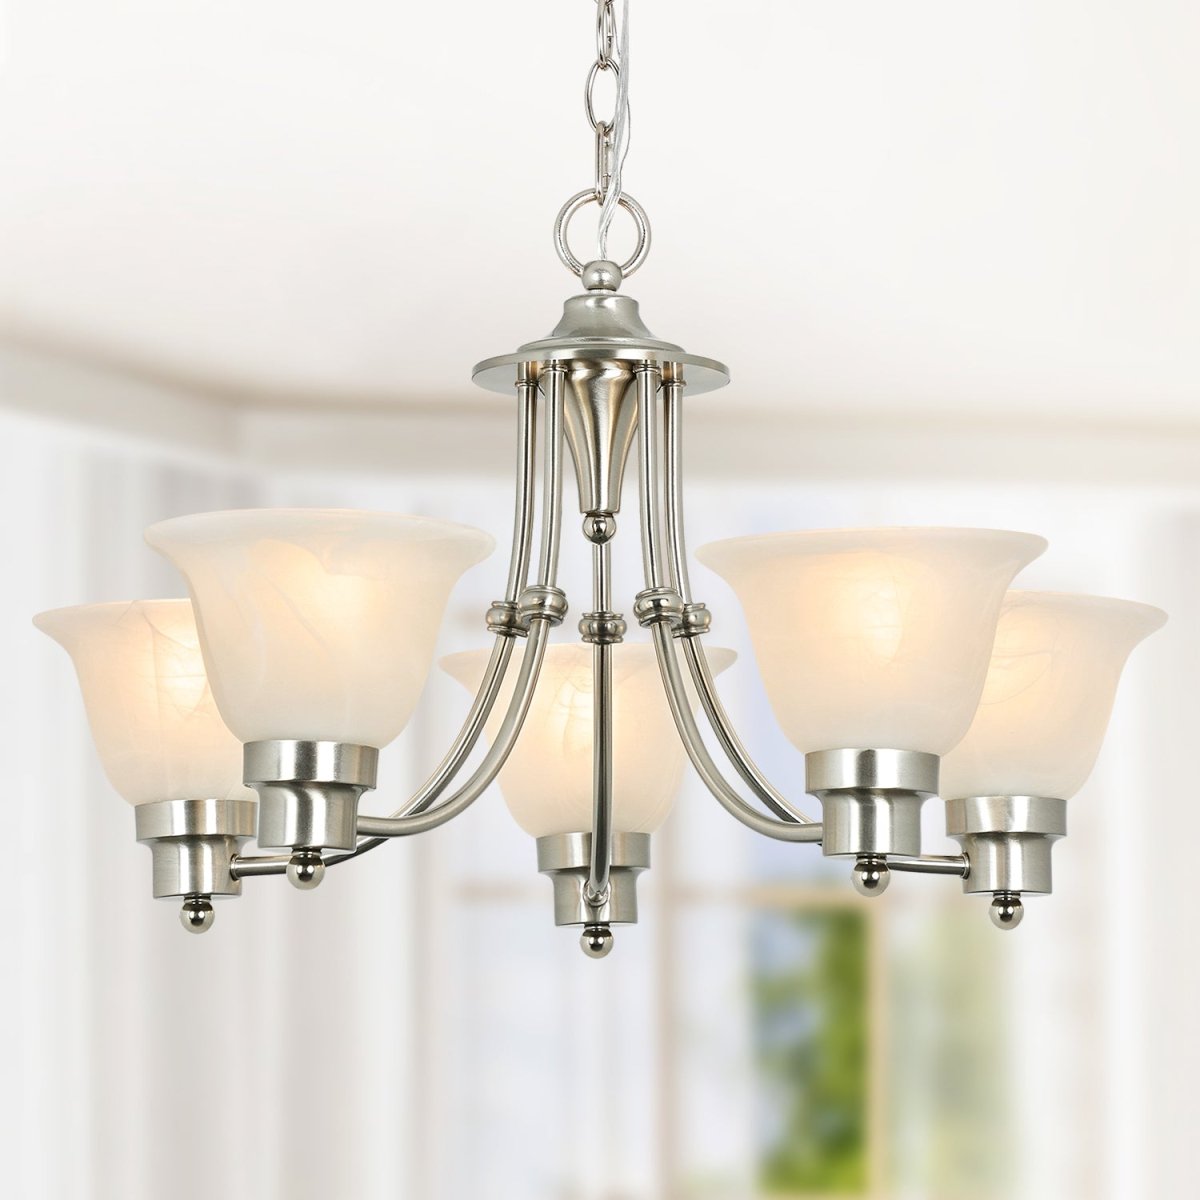 Depuley 5-Light Modern Chandelier Light Fixtures, 21" Contemporary Chandelier Brushed Nickel with Glass Shade, Adjustable Ceiling Hanging Pendant Lighting for Dining Room - WS-FND97-60B 1 | DEPULEY